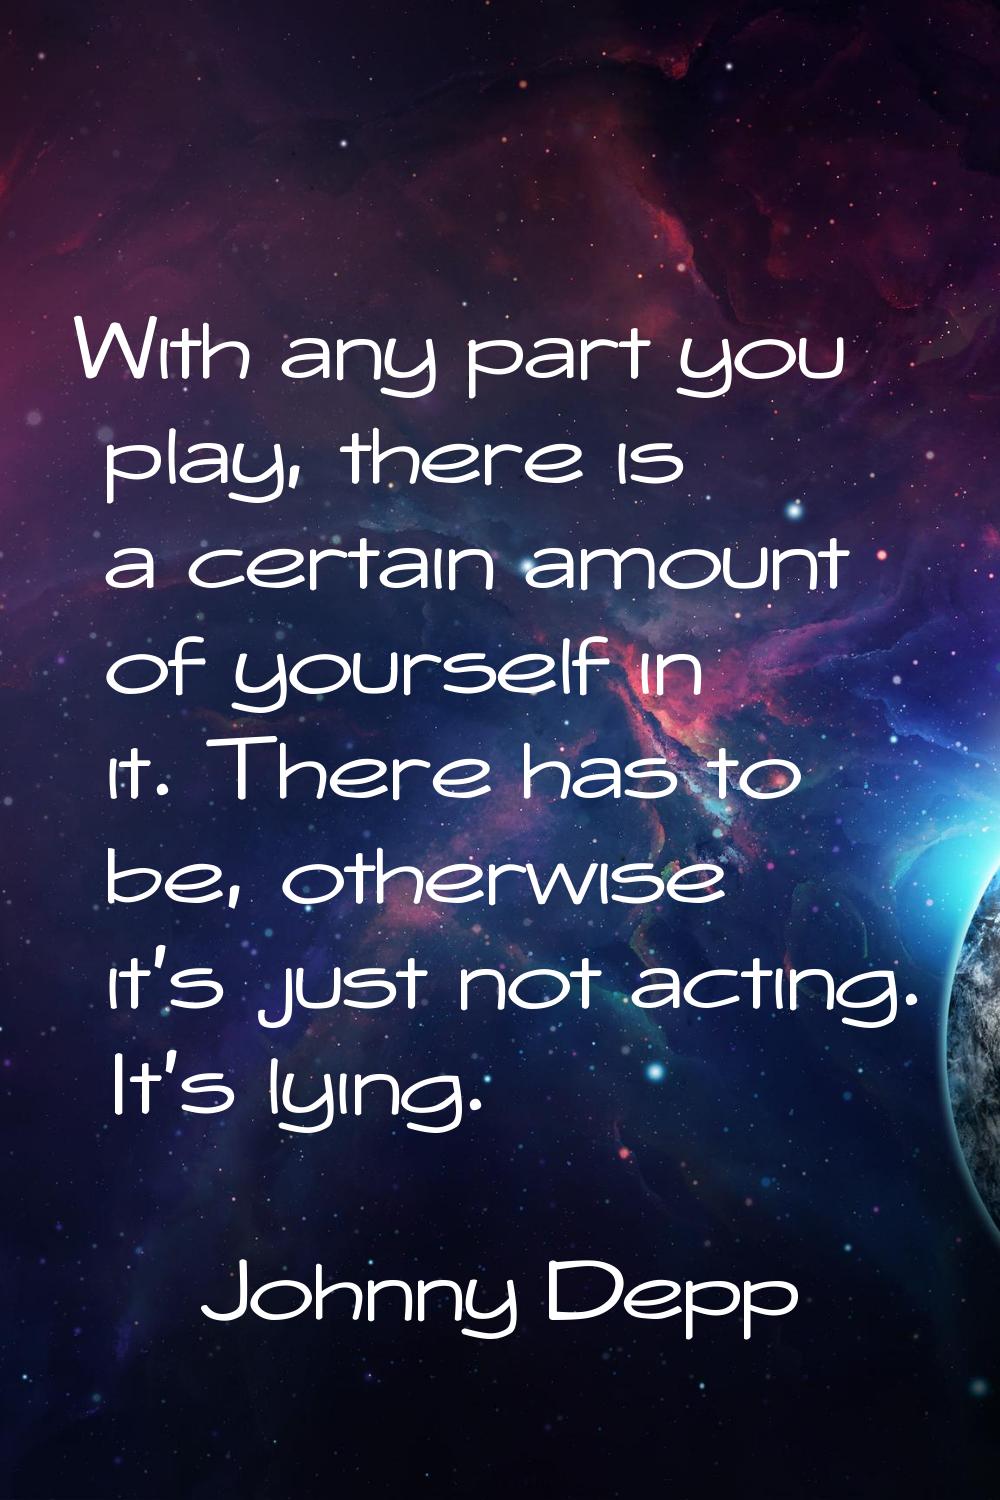 With any part you play, there is a certain amount of yourself in it. There has to be, otherwise it'